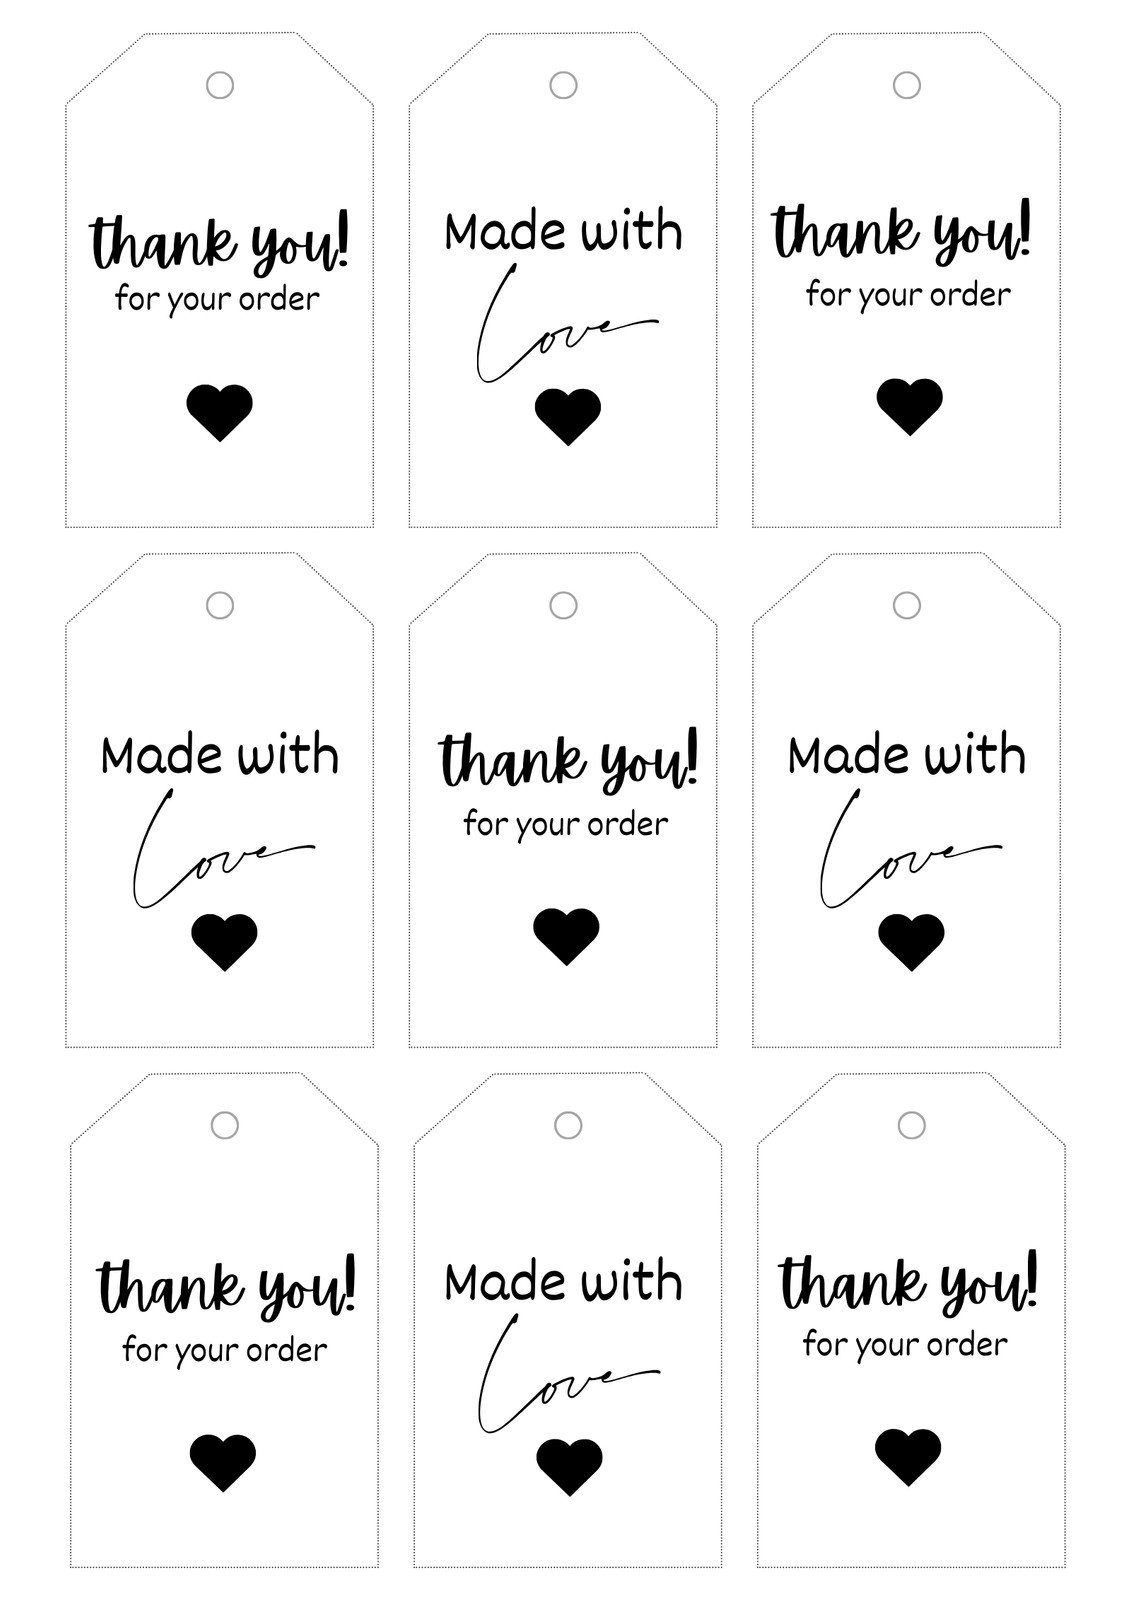 5 Senses Gift Tags Printable Labels 1st Anniversary Gift for 